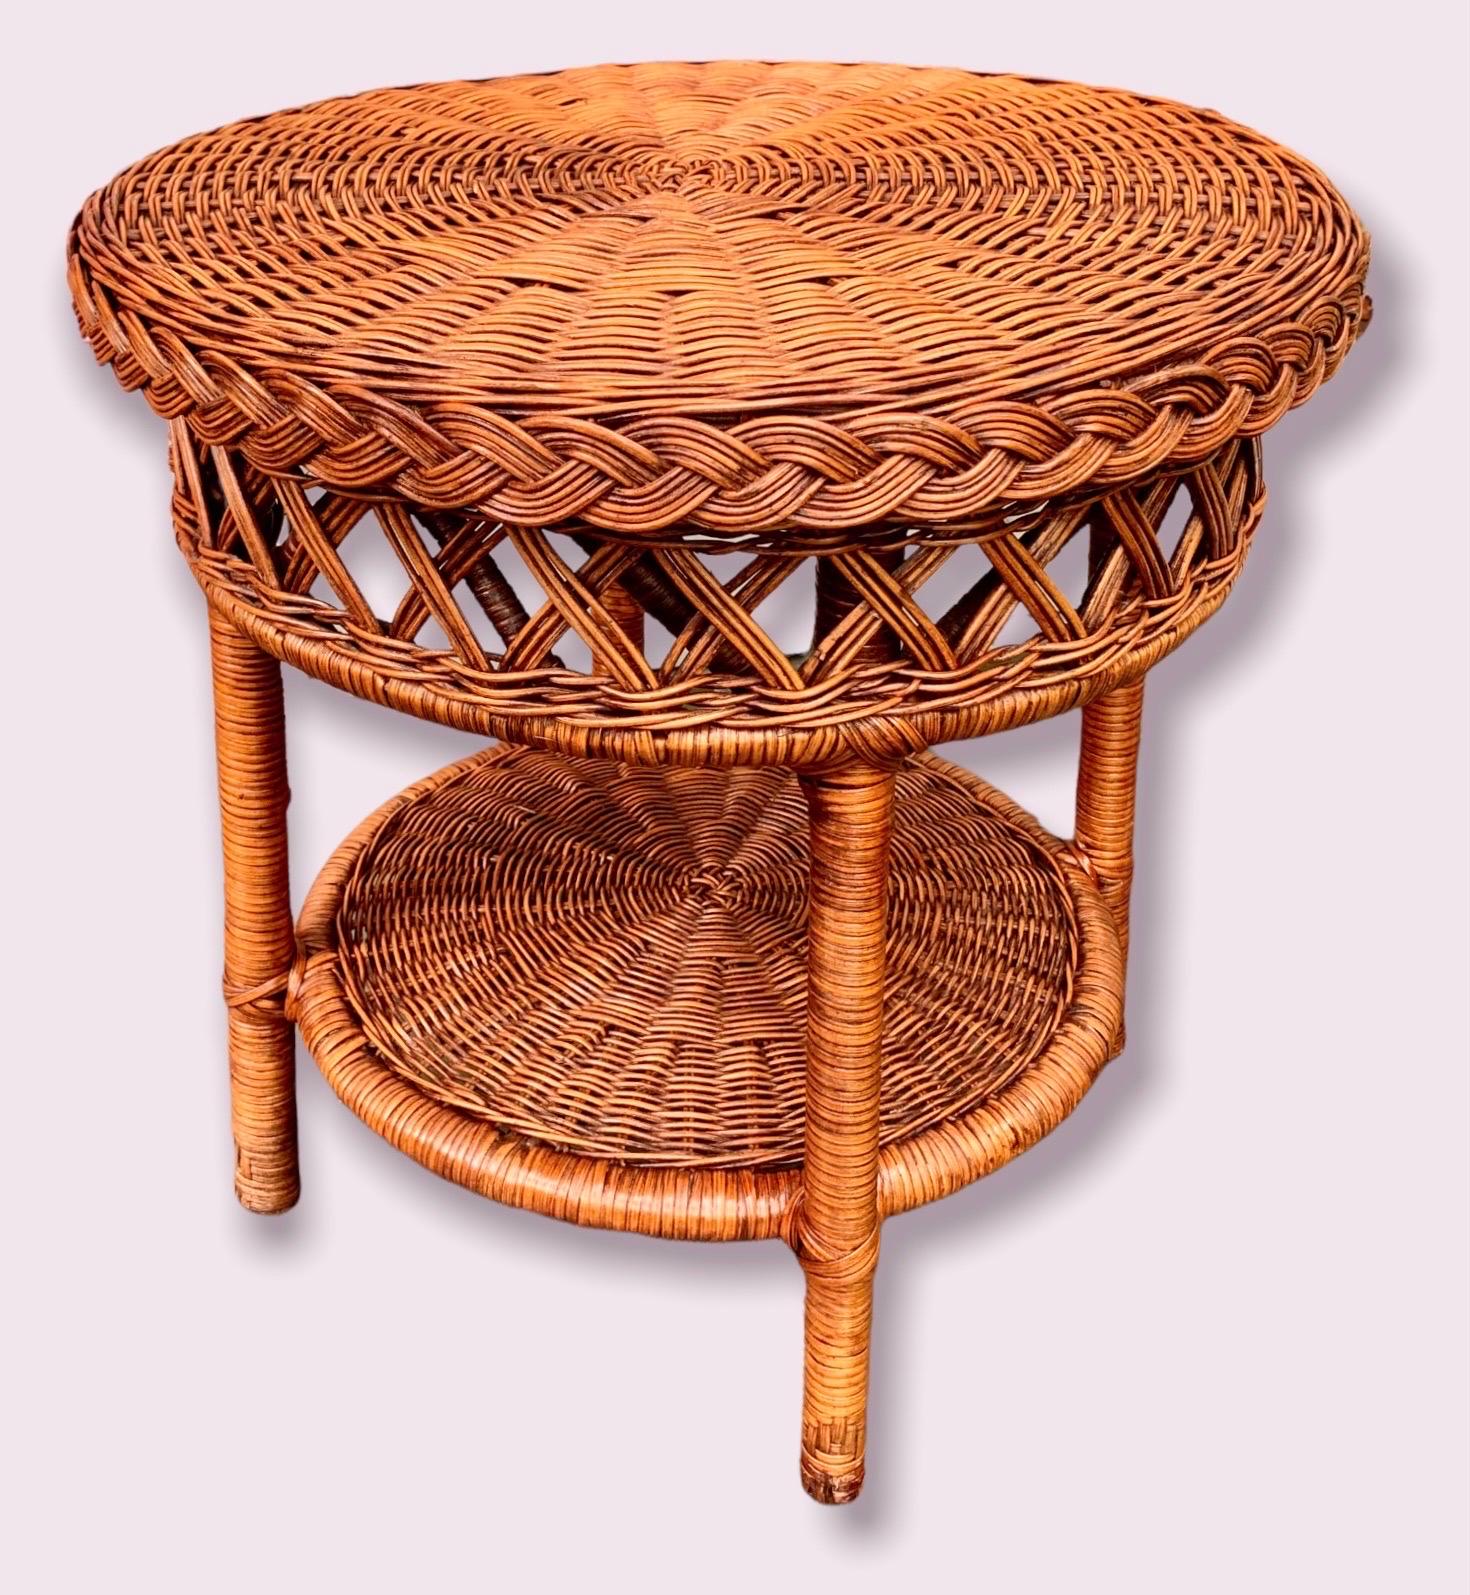 Vintage Wicker over Rattan Rd. End/Side Table 3